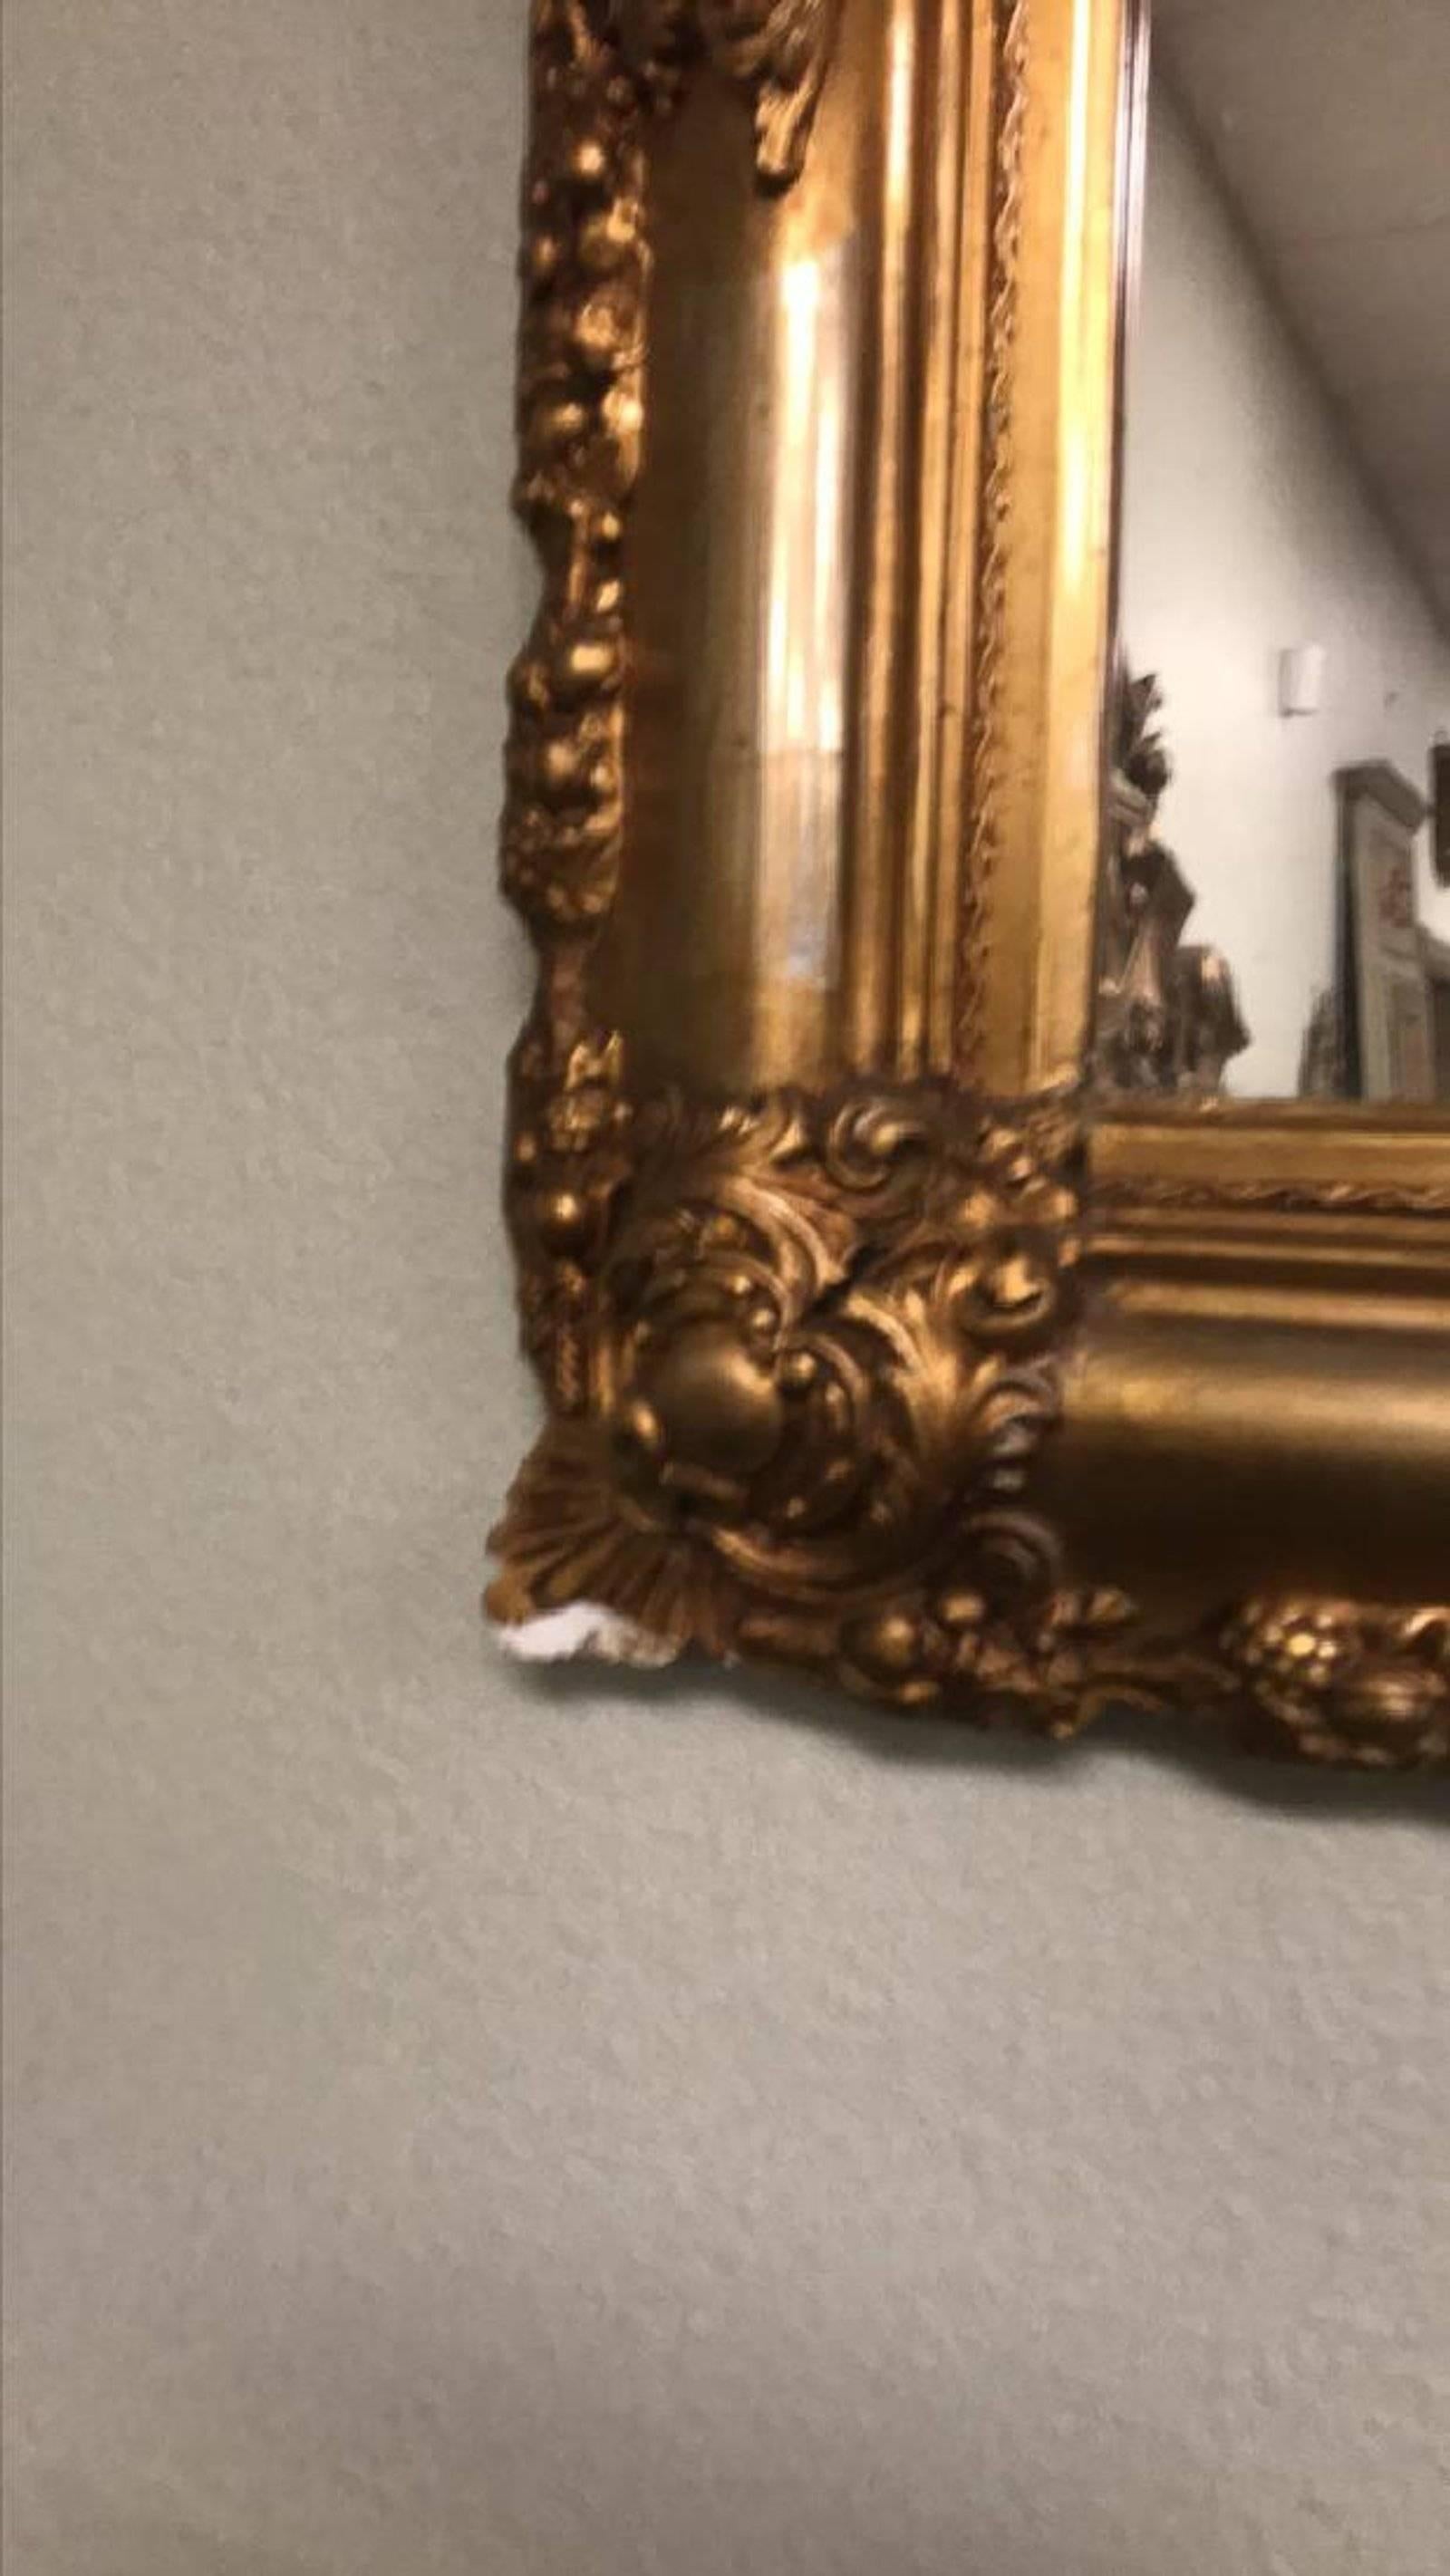 Outstanding 19th century French Napoleon III giltwood and gesso wall mirror with a carved lovebird and leaf scroll pediment. The borders carved in an acanthus leaf and festoon motif,

circa 1890

Slight chipping to gesso on bottom left corner as